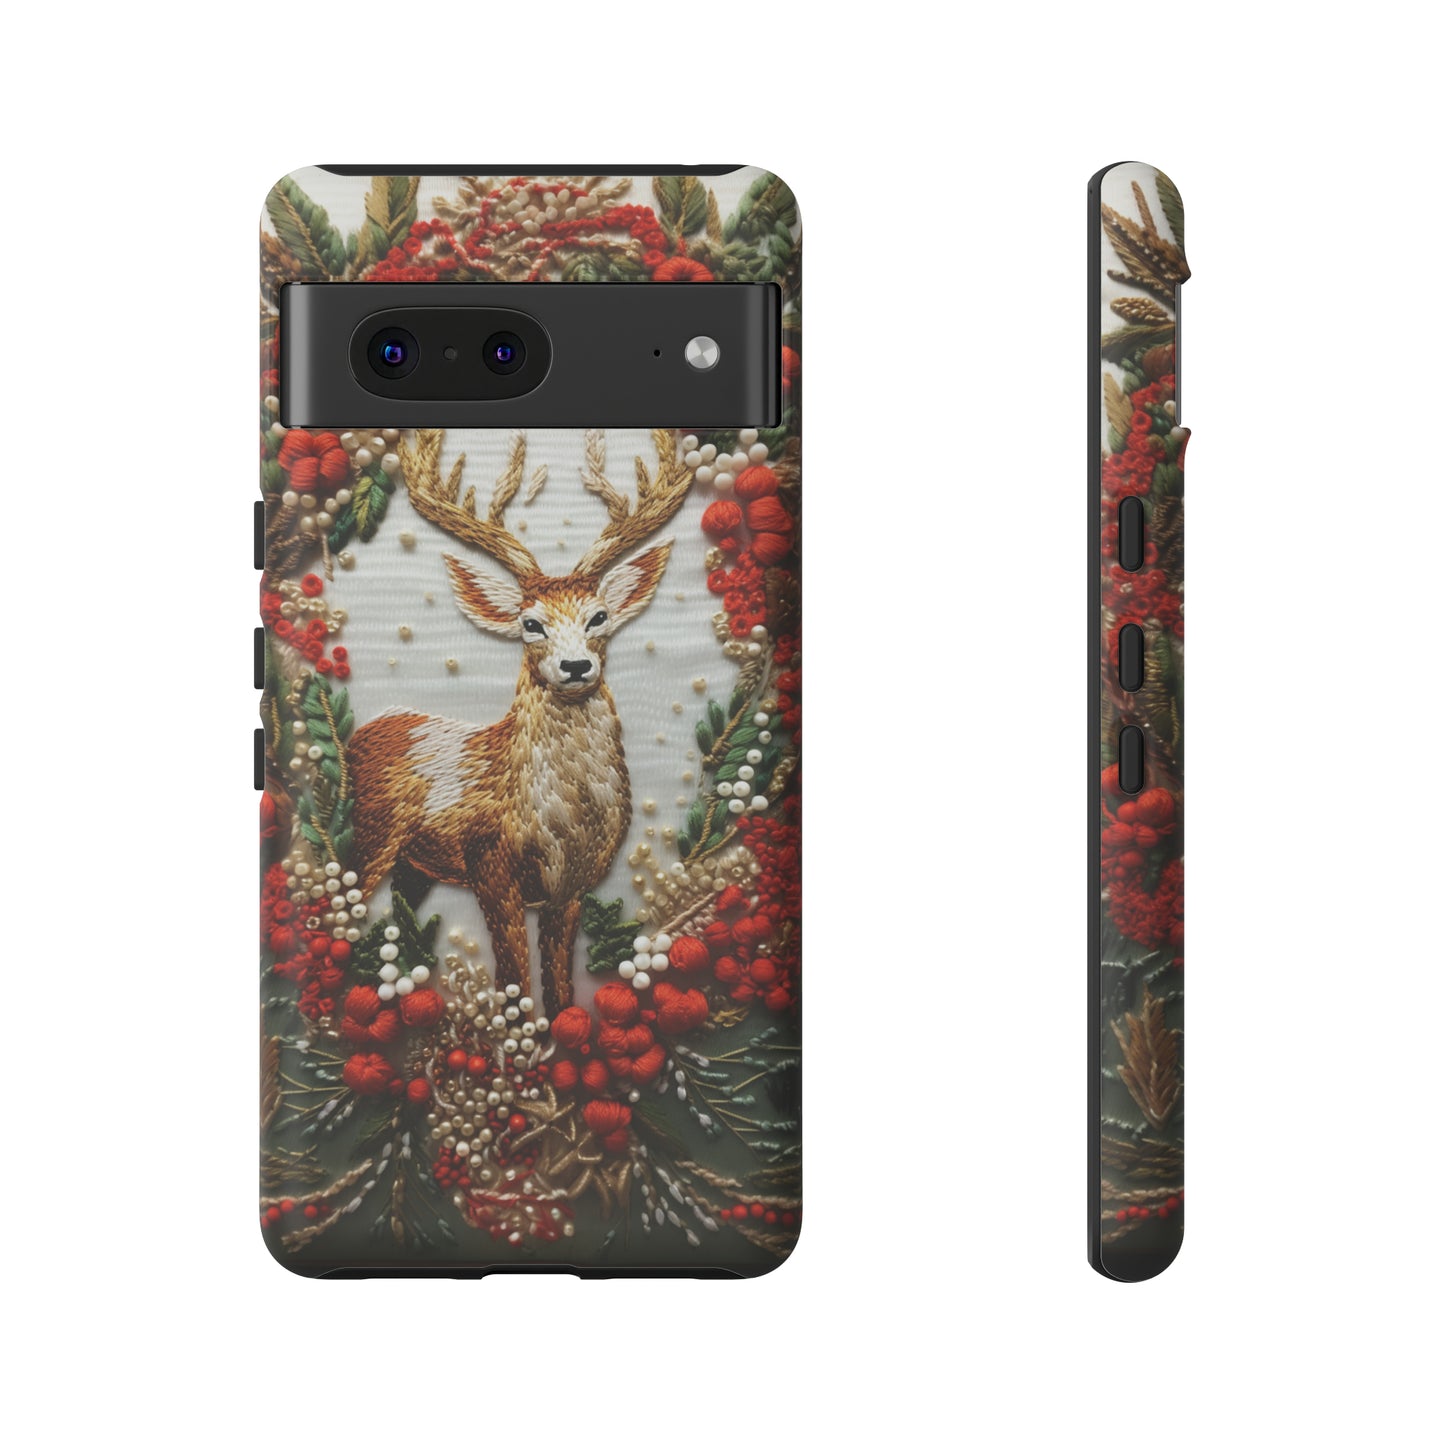 Embroidery Christmas Deer Floral Phone Case